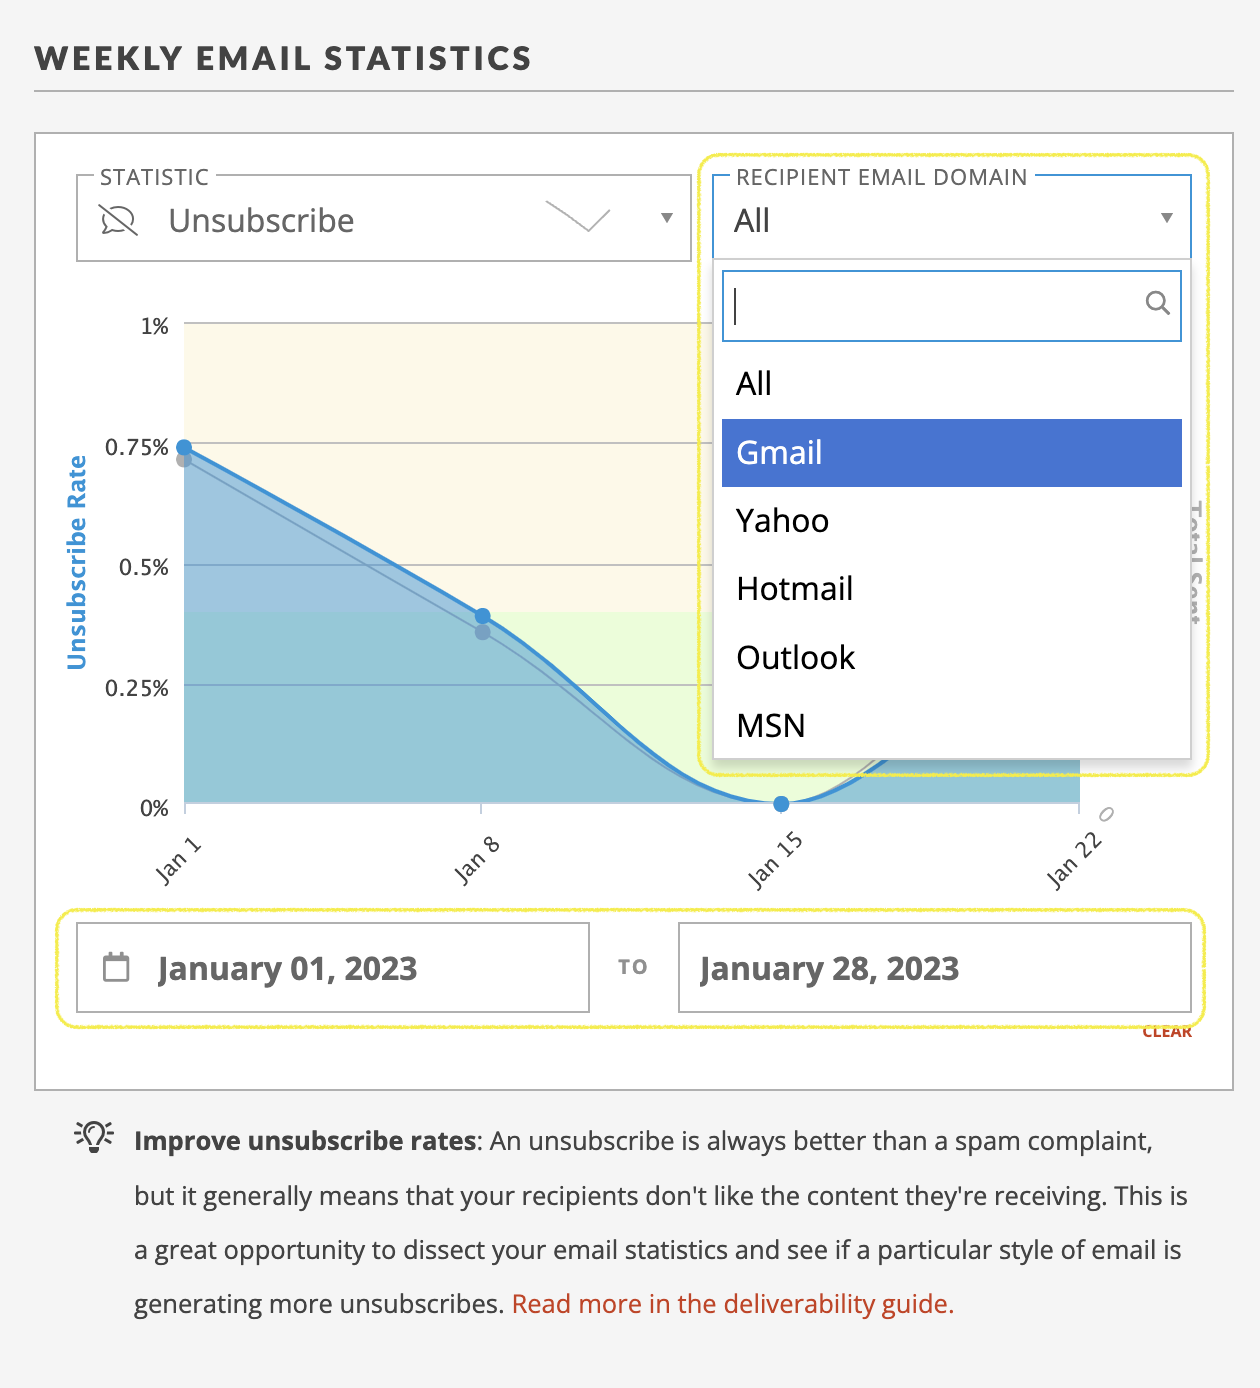 A screenshot of the Deliverability Dashboard showing unsubscribe statistics for Gmail users from January 1, 2023 to January 28, 2023.